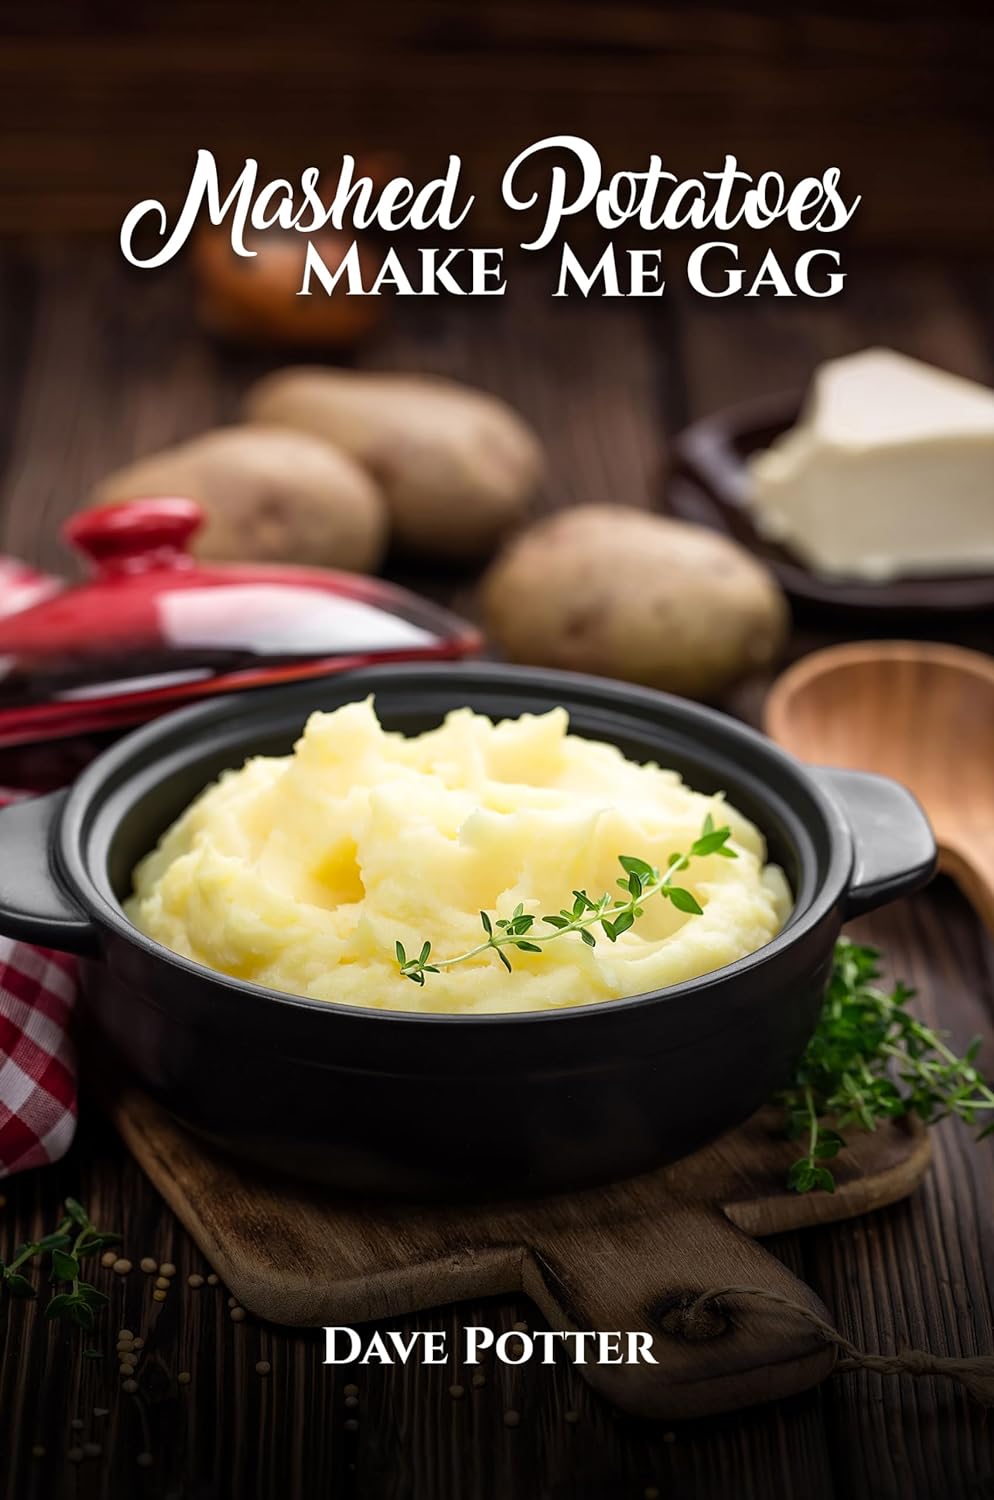 New Memoir Chronicles Life During the Great Depression and Beyond: "Mashed Potatoes Make Me Gag" by Dave Potter and Friends